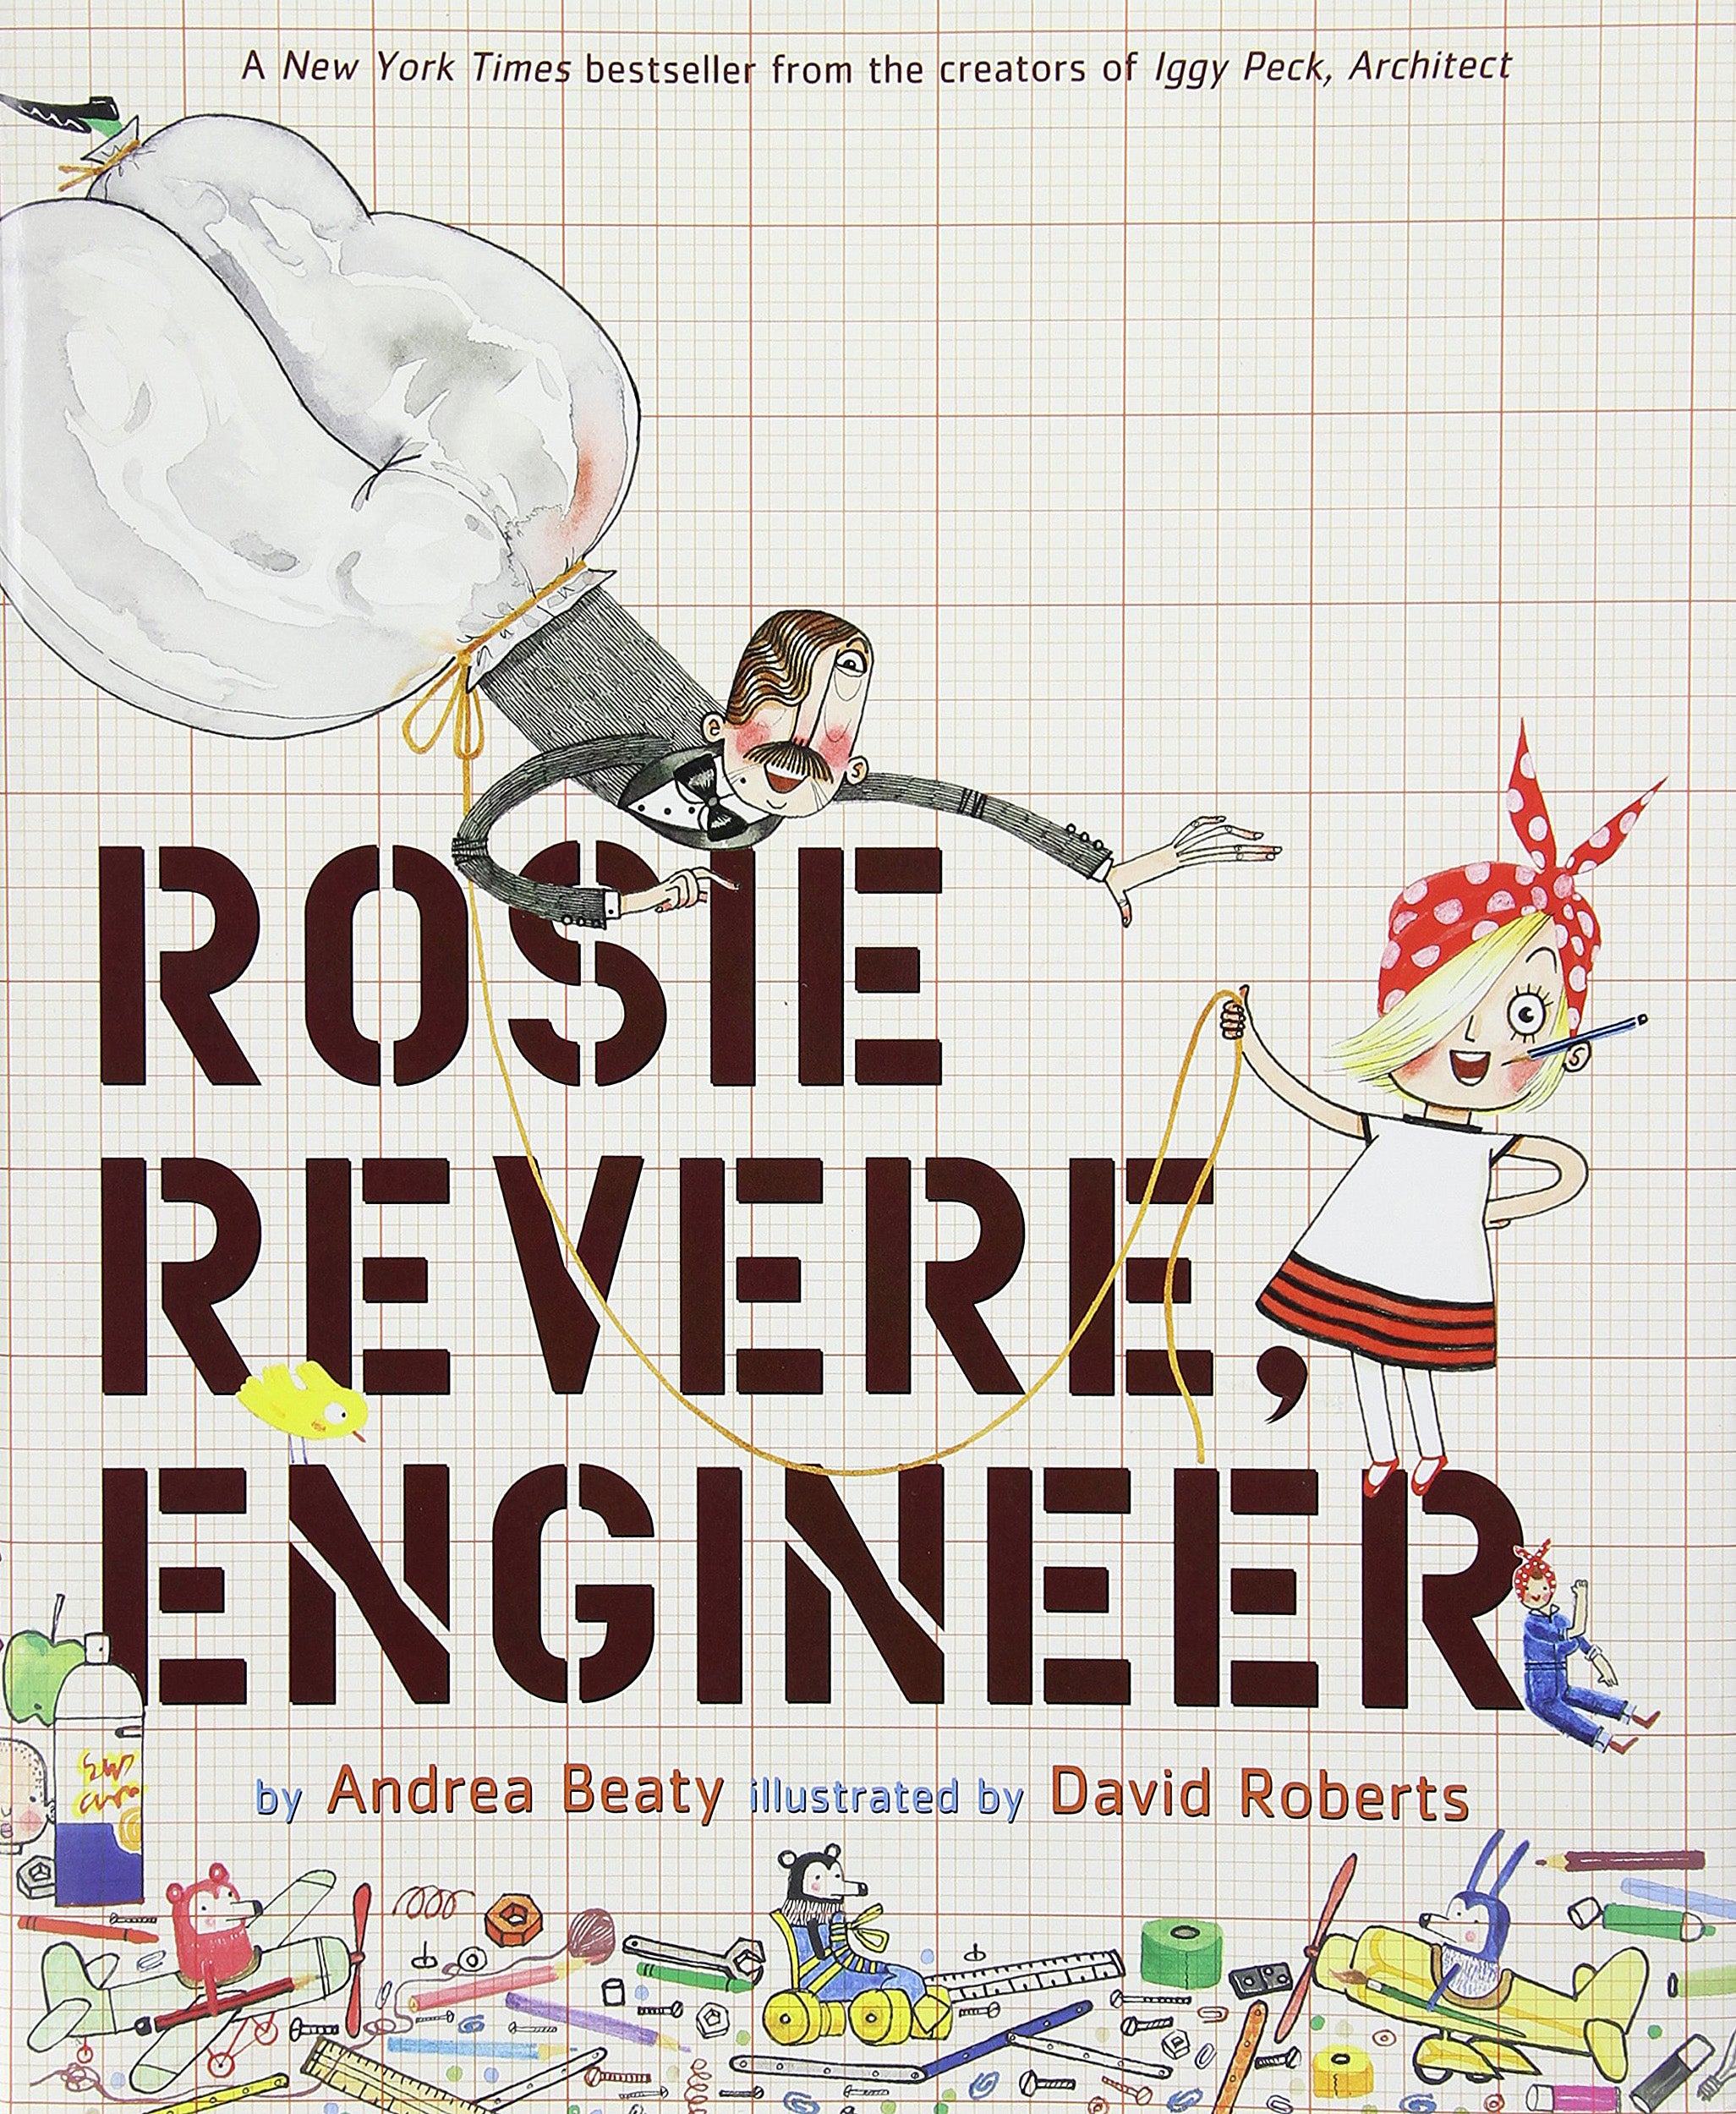 Cover of “Rosie Revere, Engineer” by Andrea Beaty.